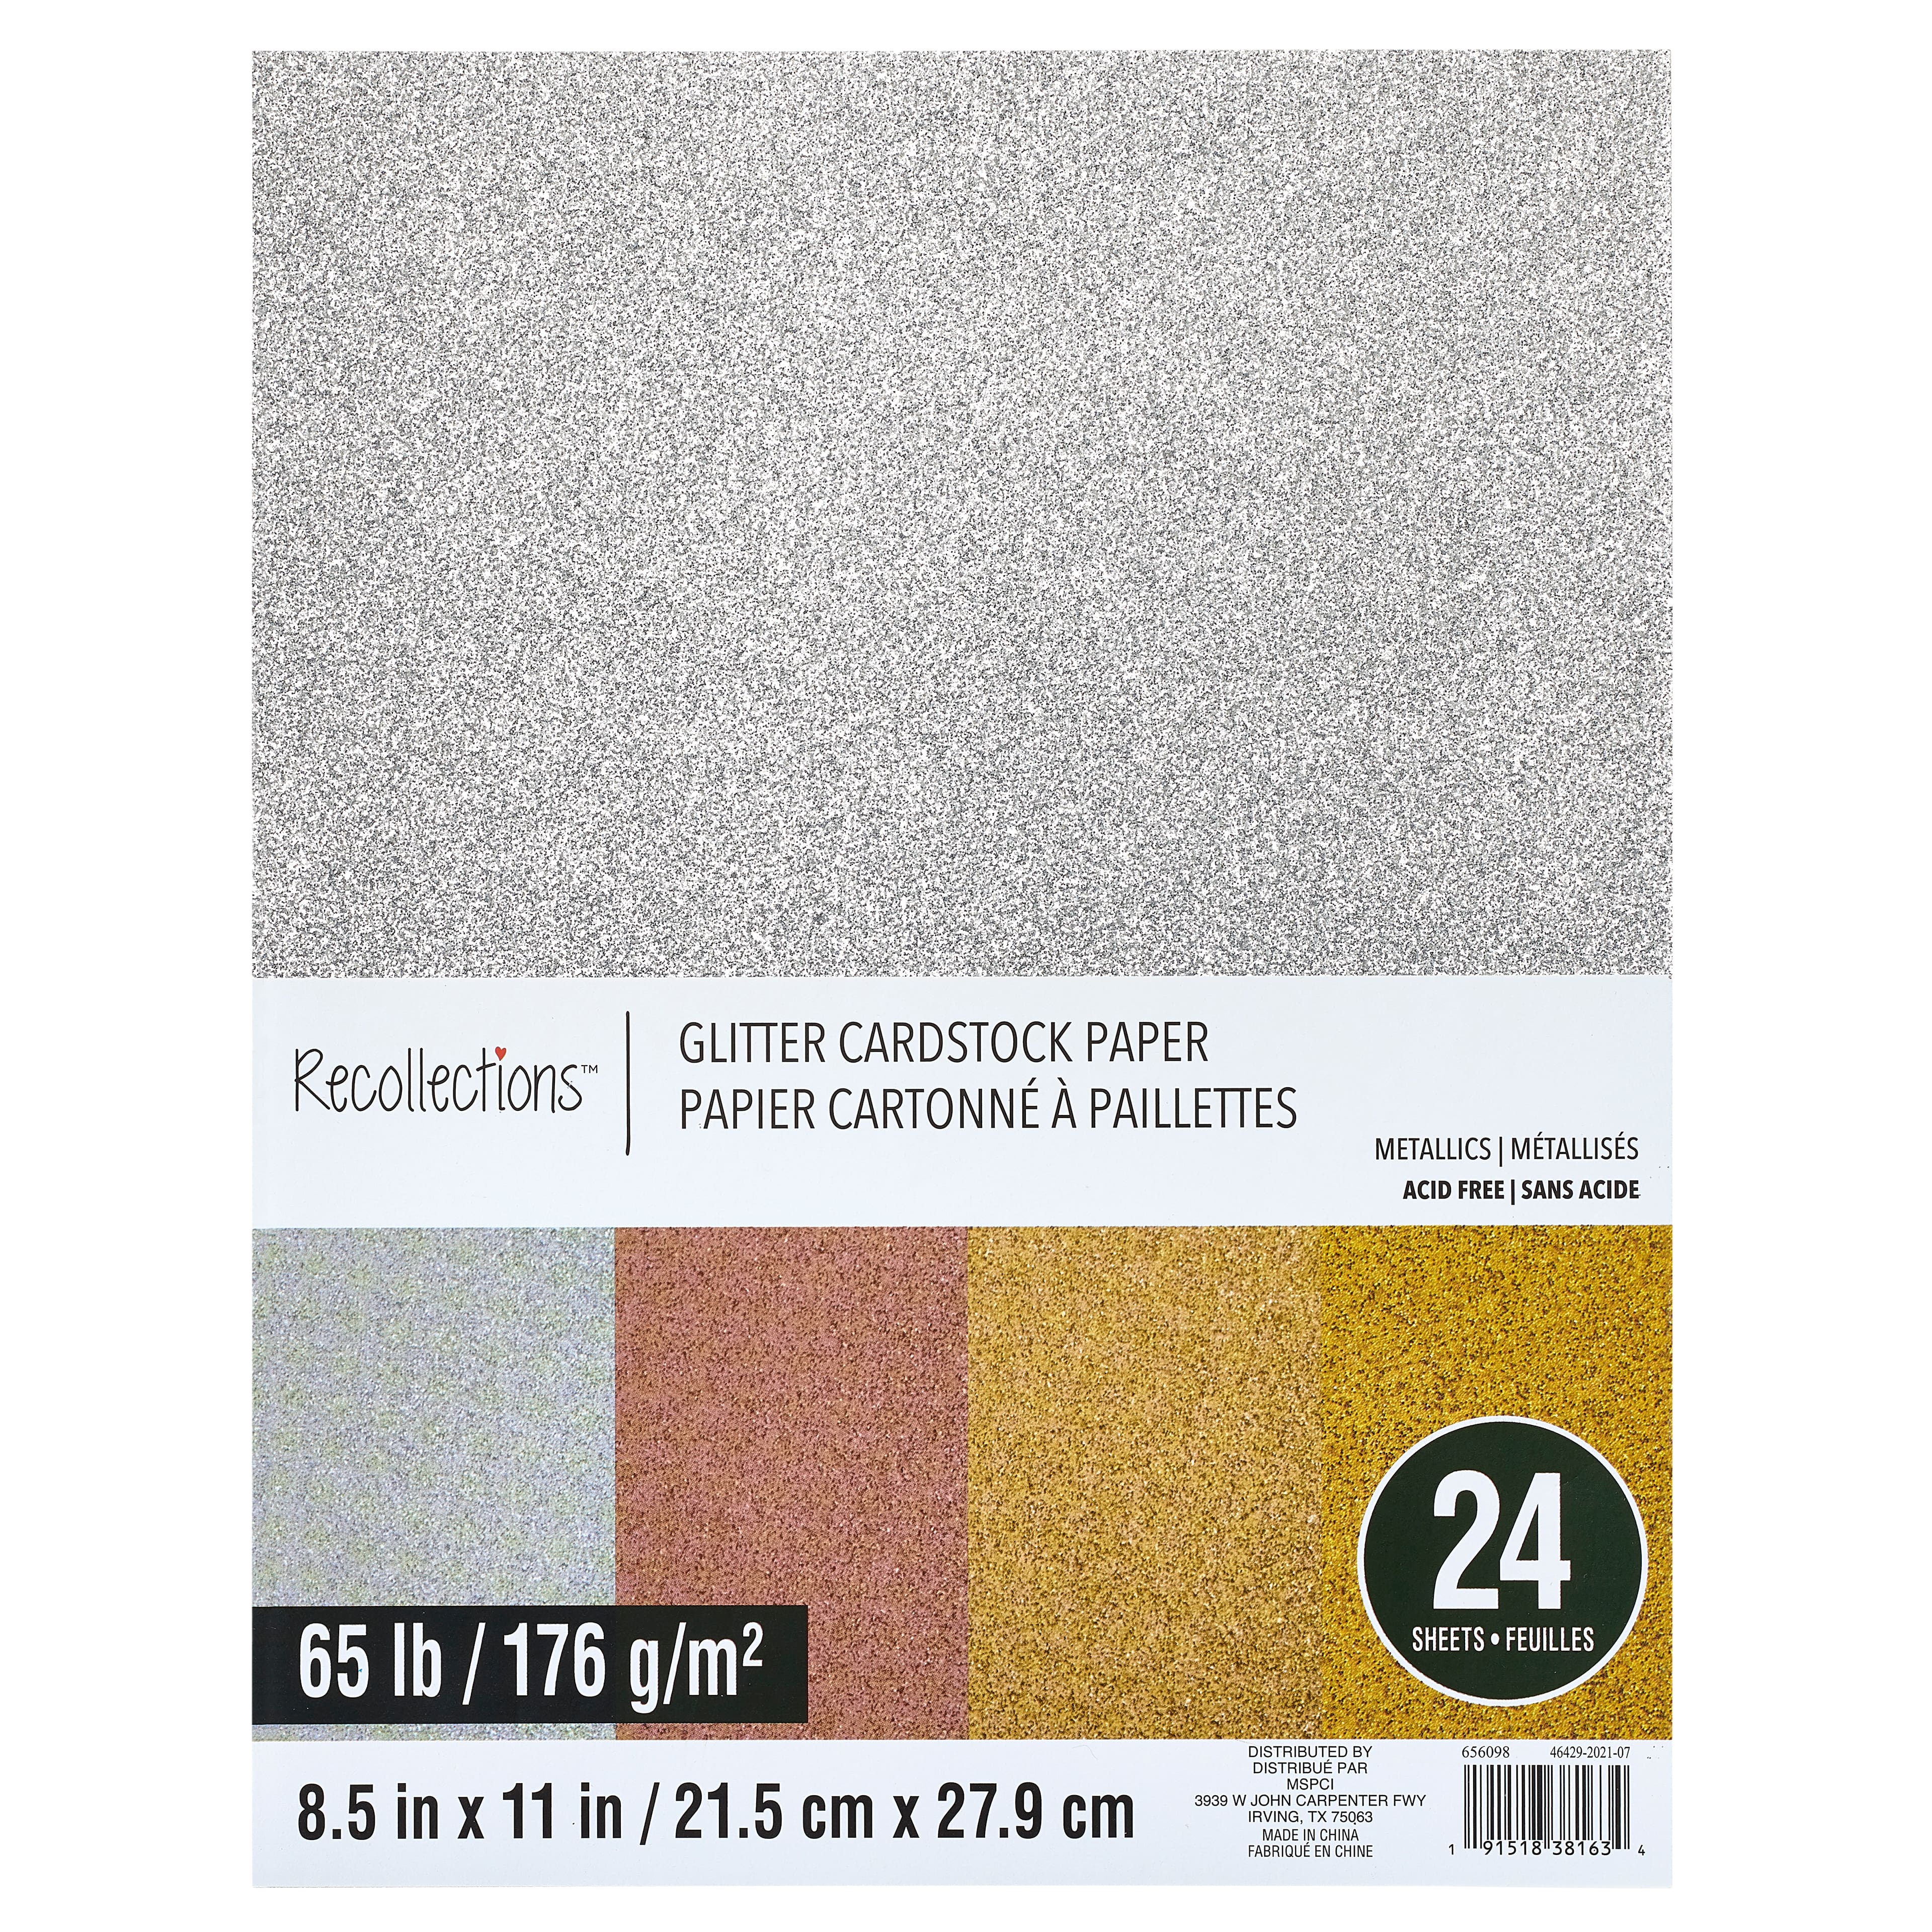 Glitter Metallic Cardstock Paper by Recollections™, 8.5